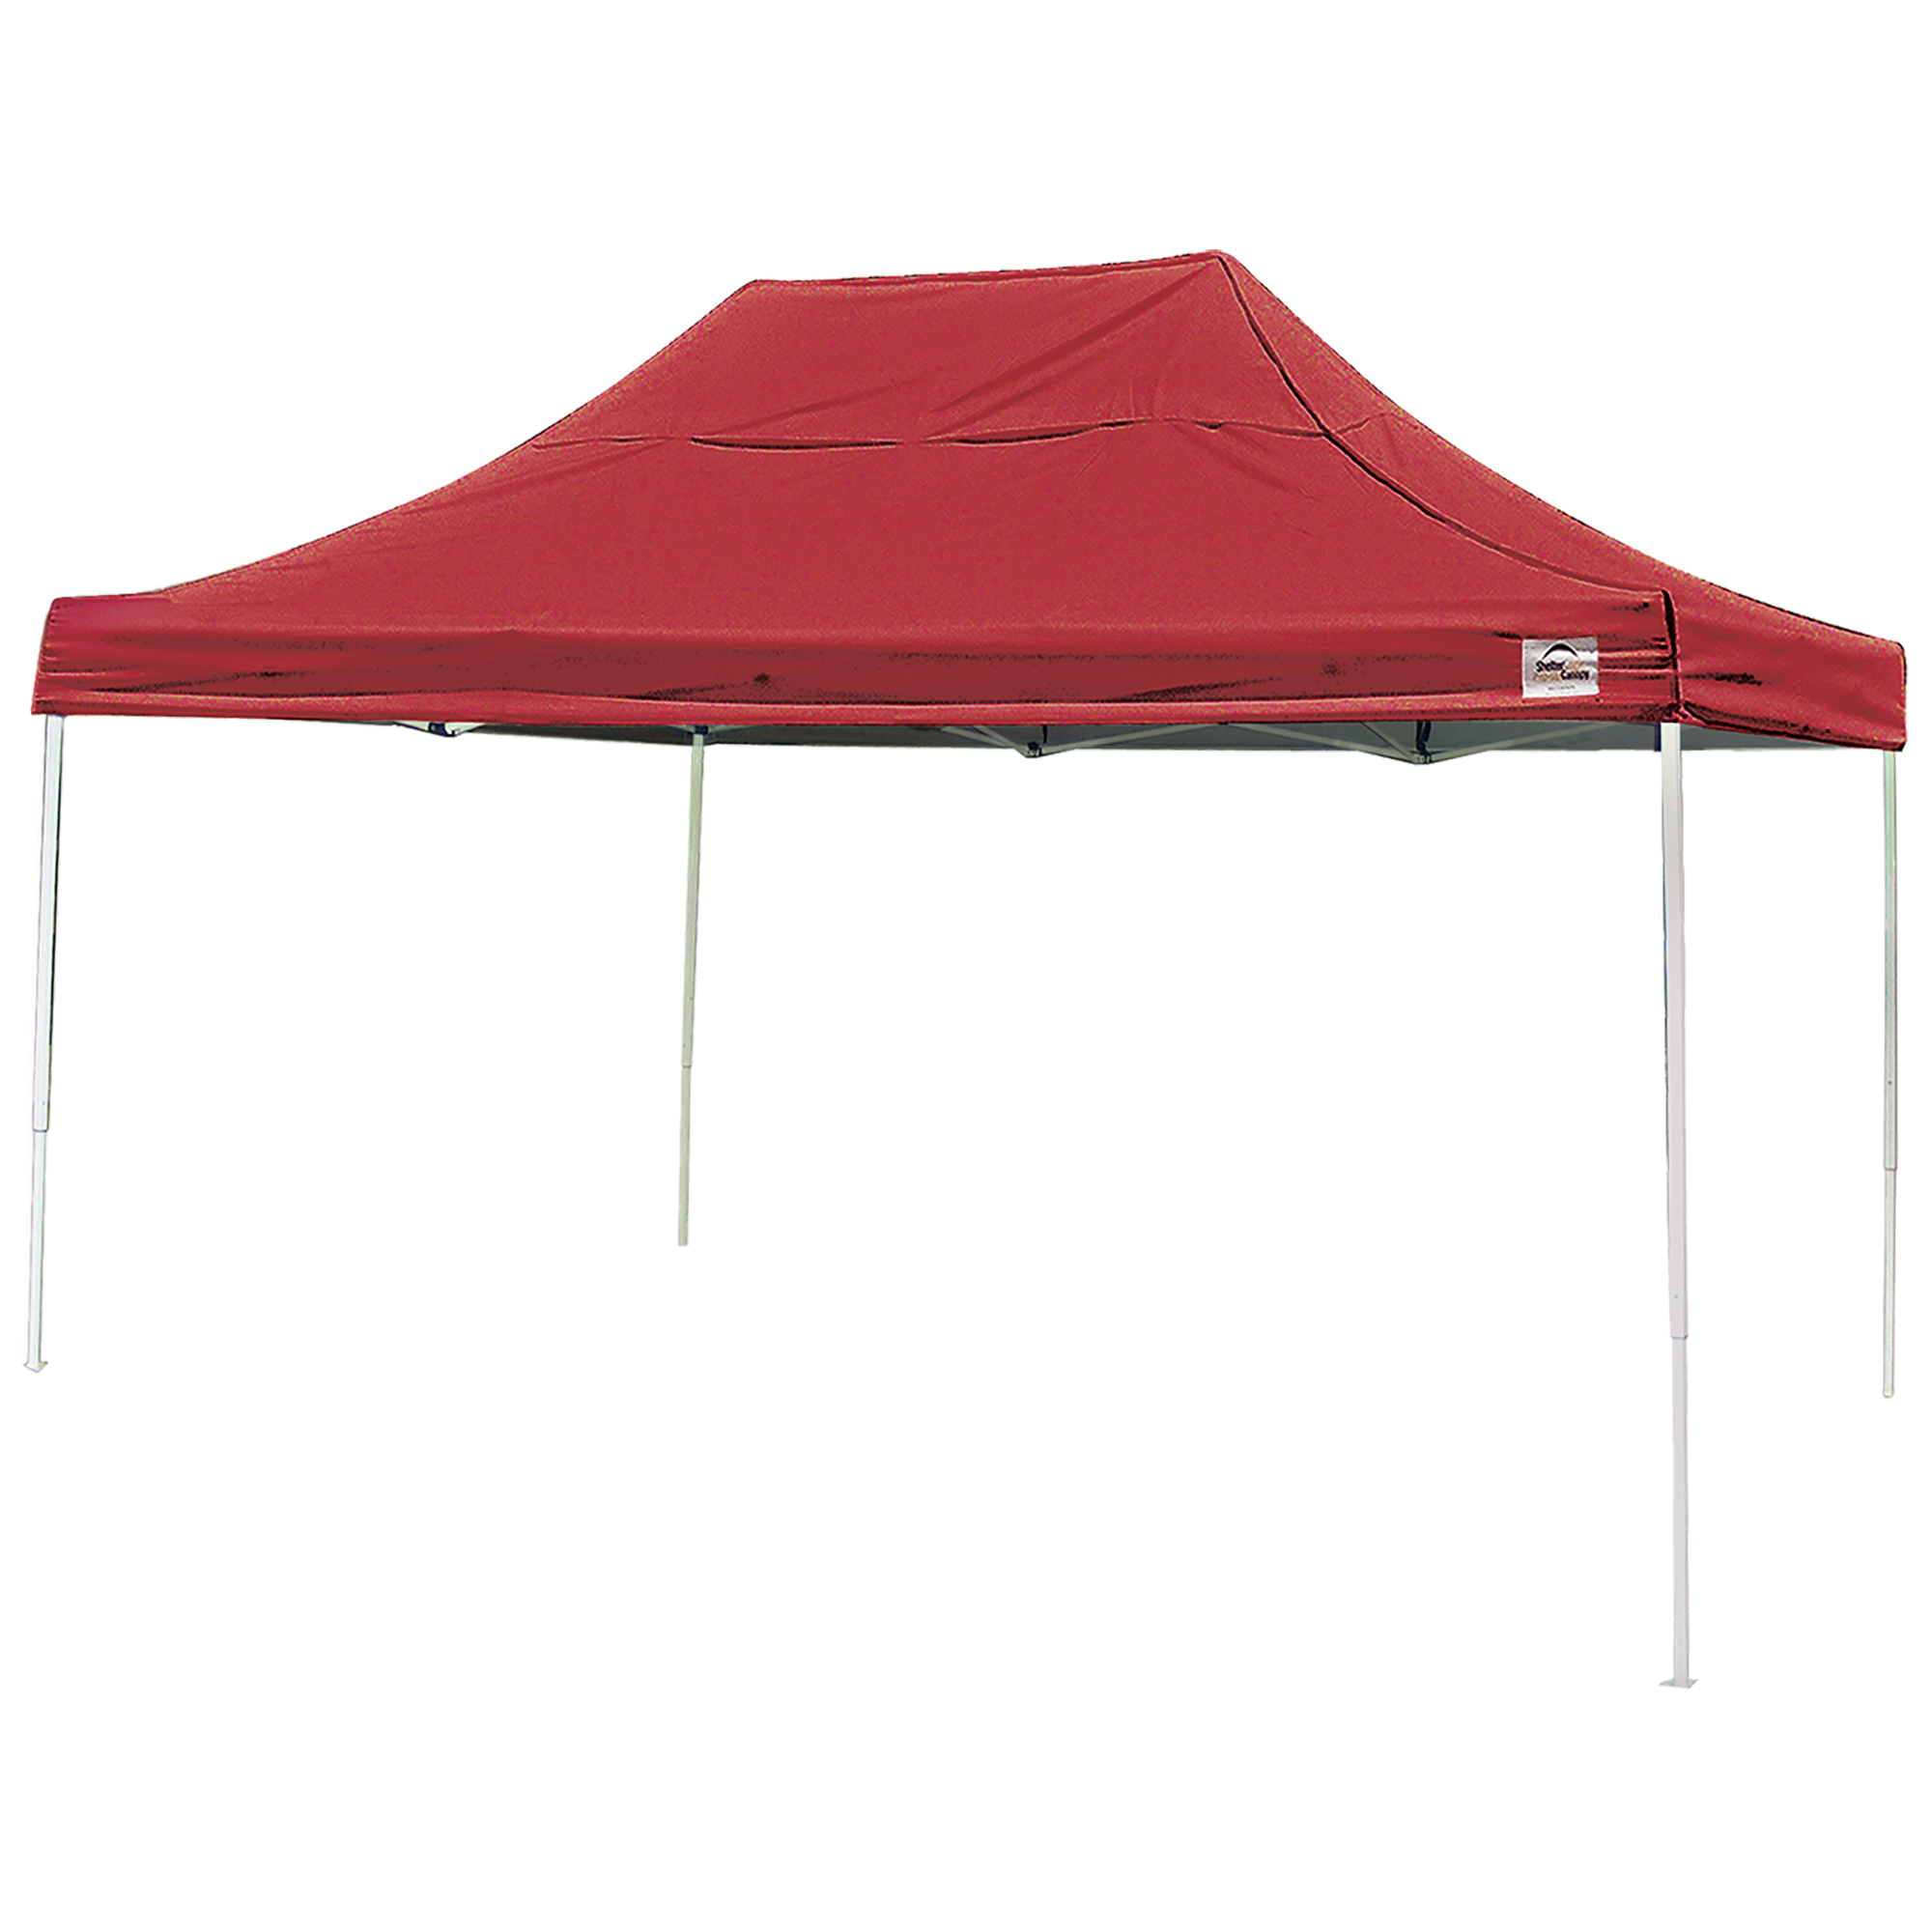 10 Ft. X 15 Ft. Pro Pop-up Canopy Straight Leg, Red Cover